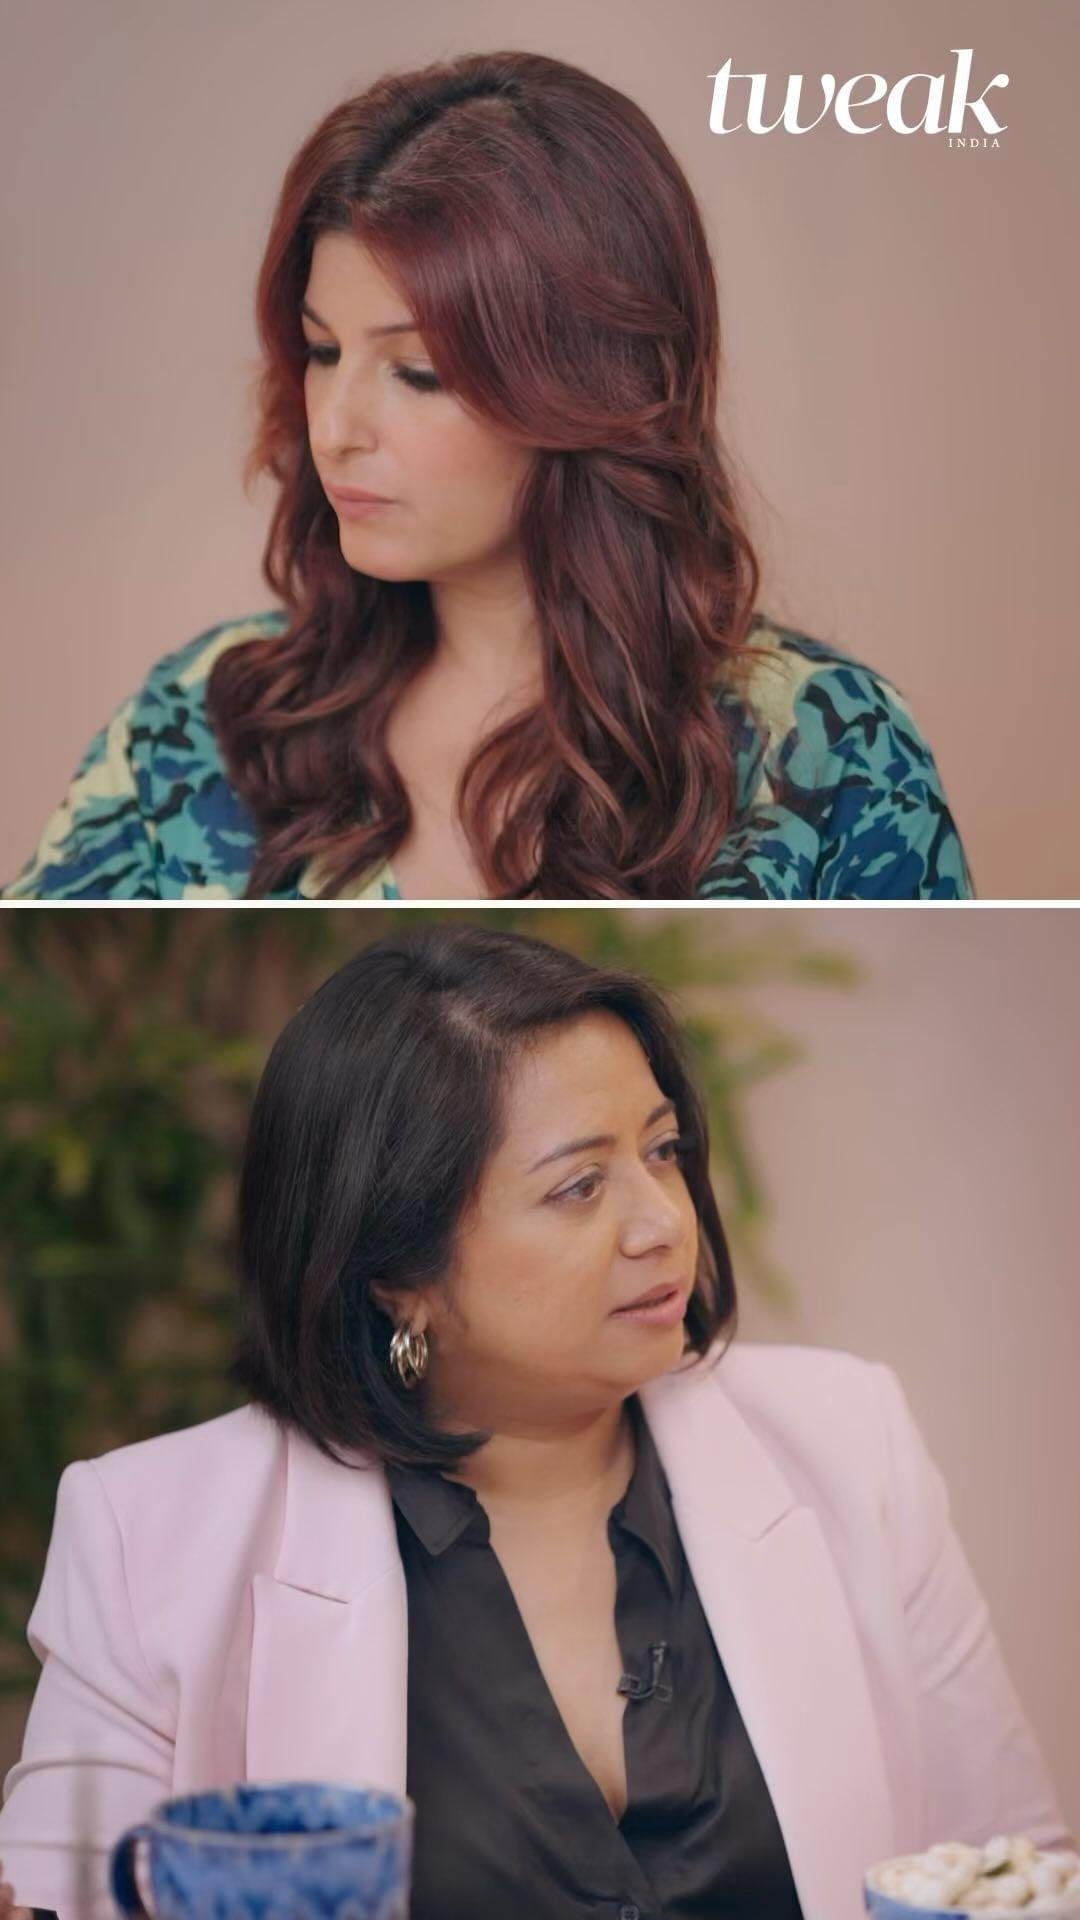 On our next episode of The Icons @fayedsouza tells us why being called a super mom may not be such a great thing after all. I think this is one of the best interviews in the series. 
To watch the entire conversation head to the links in my stories or to @tweakindia ‘s YouTube channel. 

Do you also think that moms end up doing a lot more than their share? Let me know in the comments below.